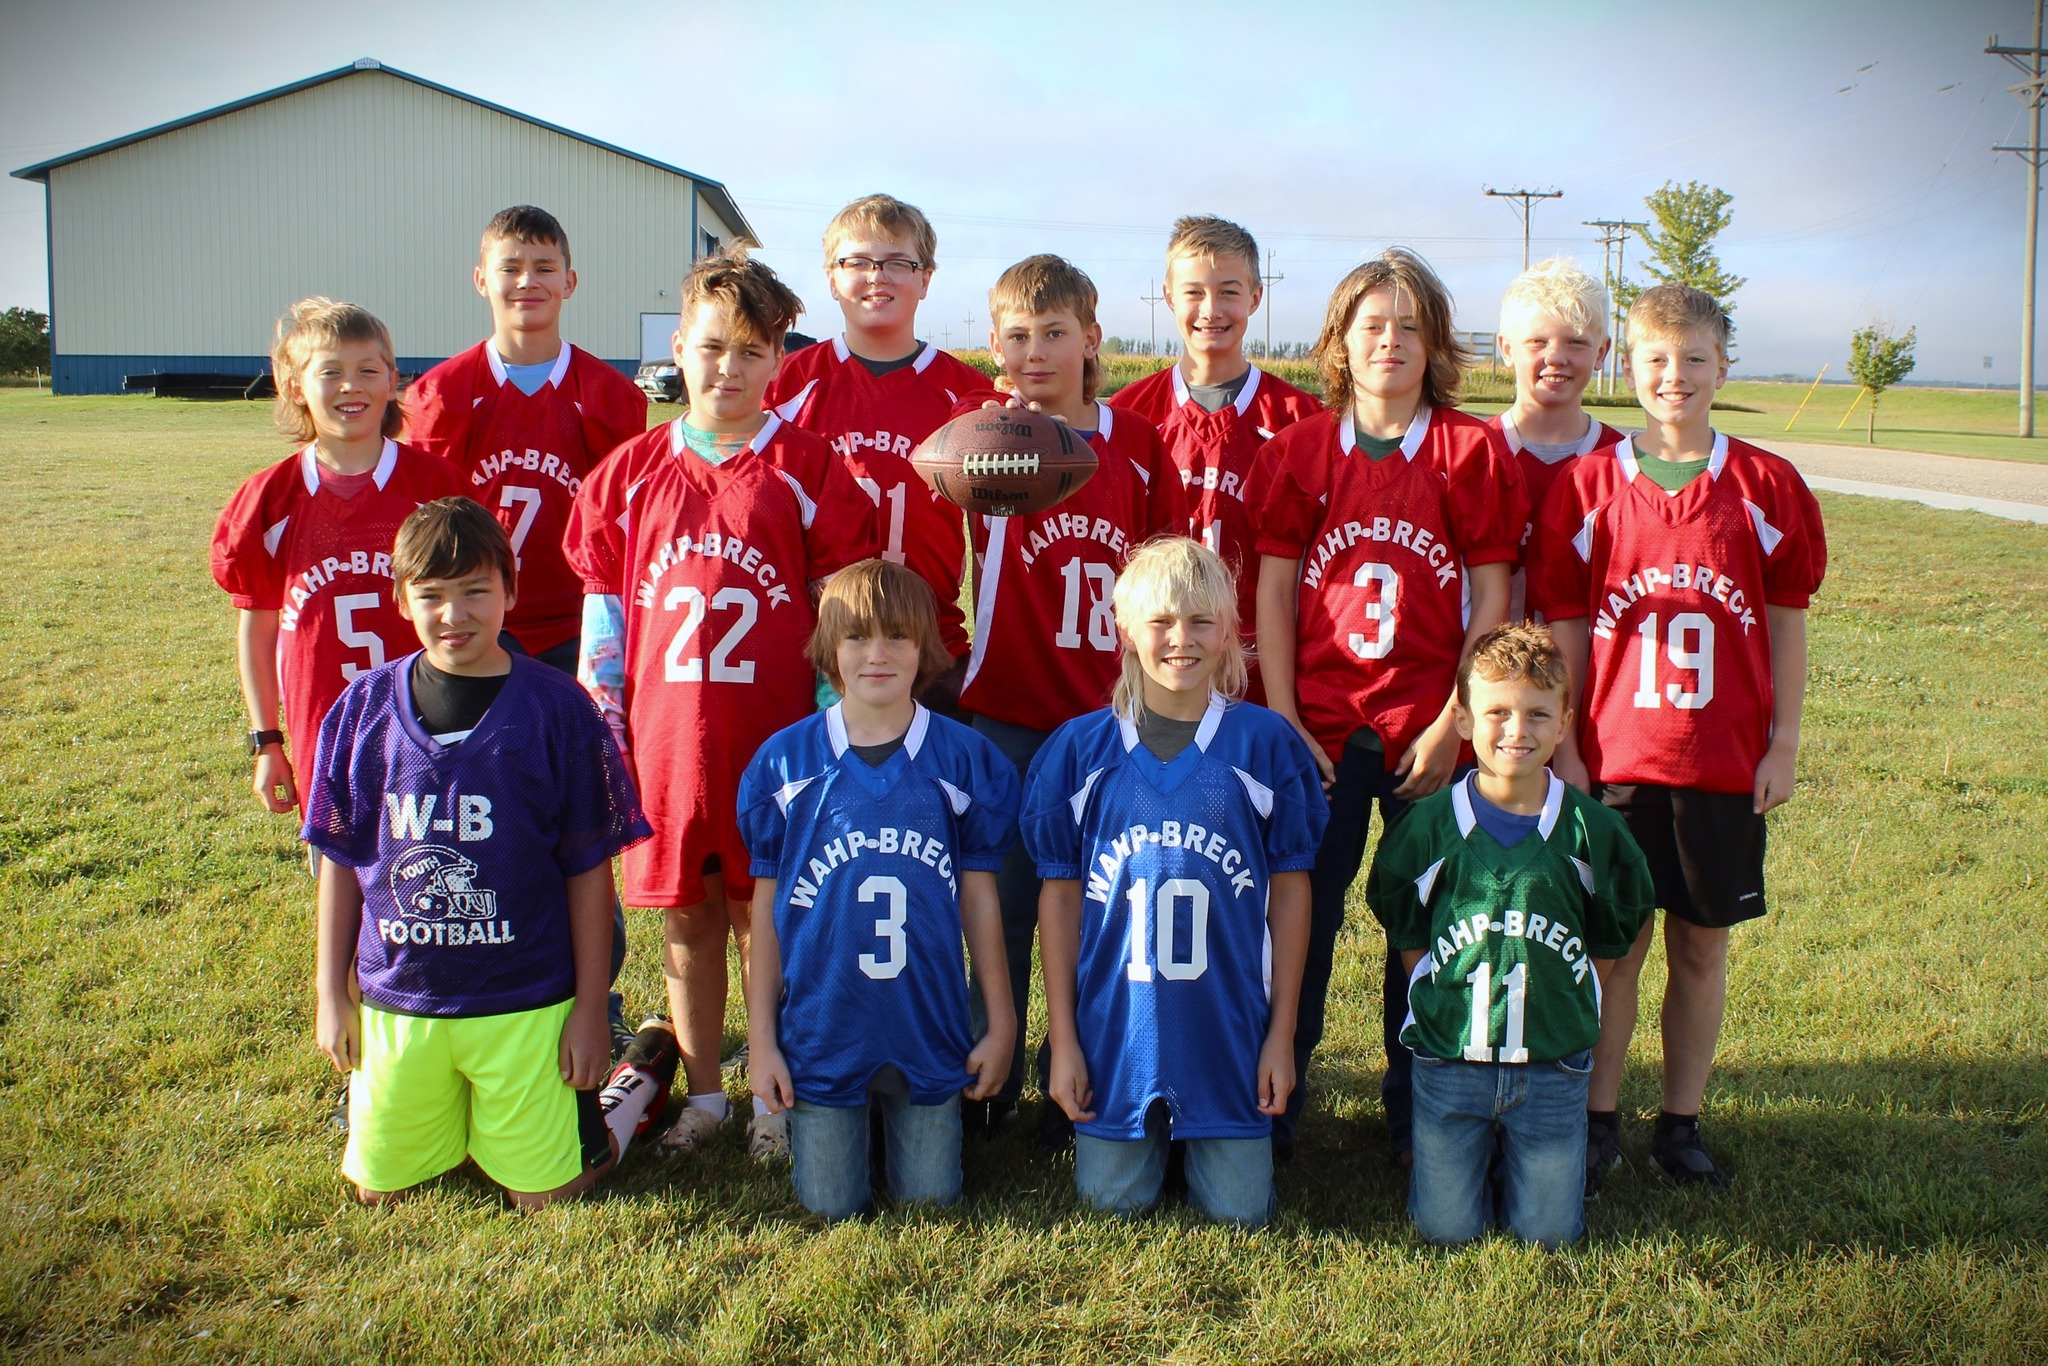 W-B Football players from Richland